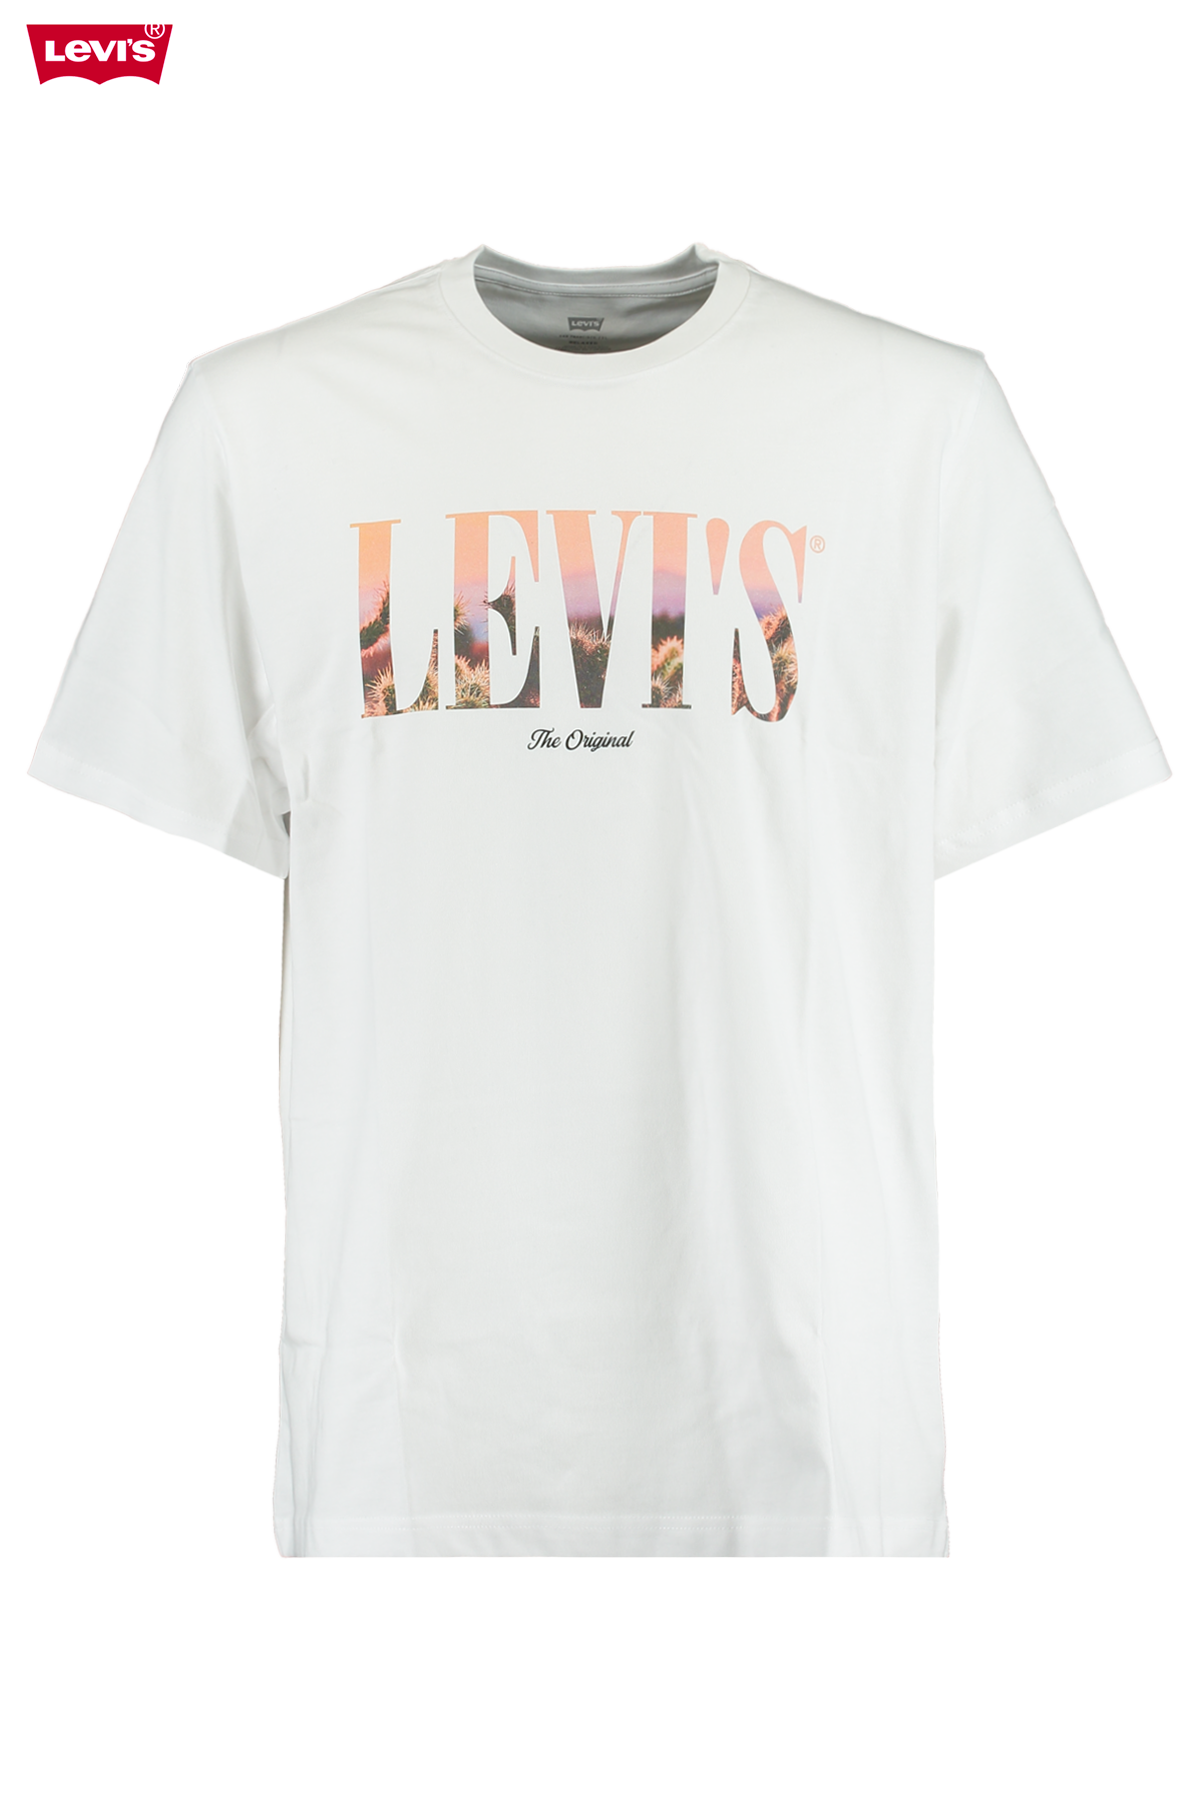 levi's relaxed fit mens